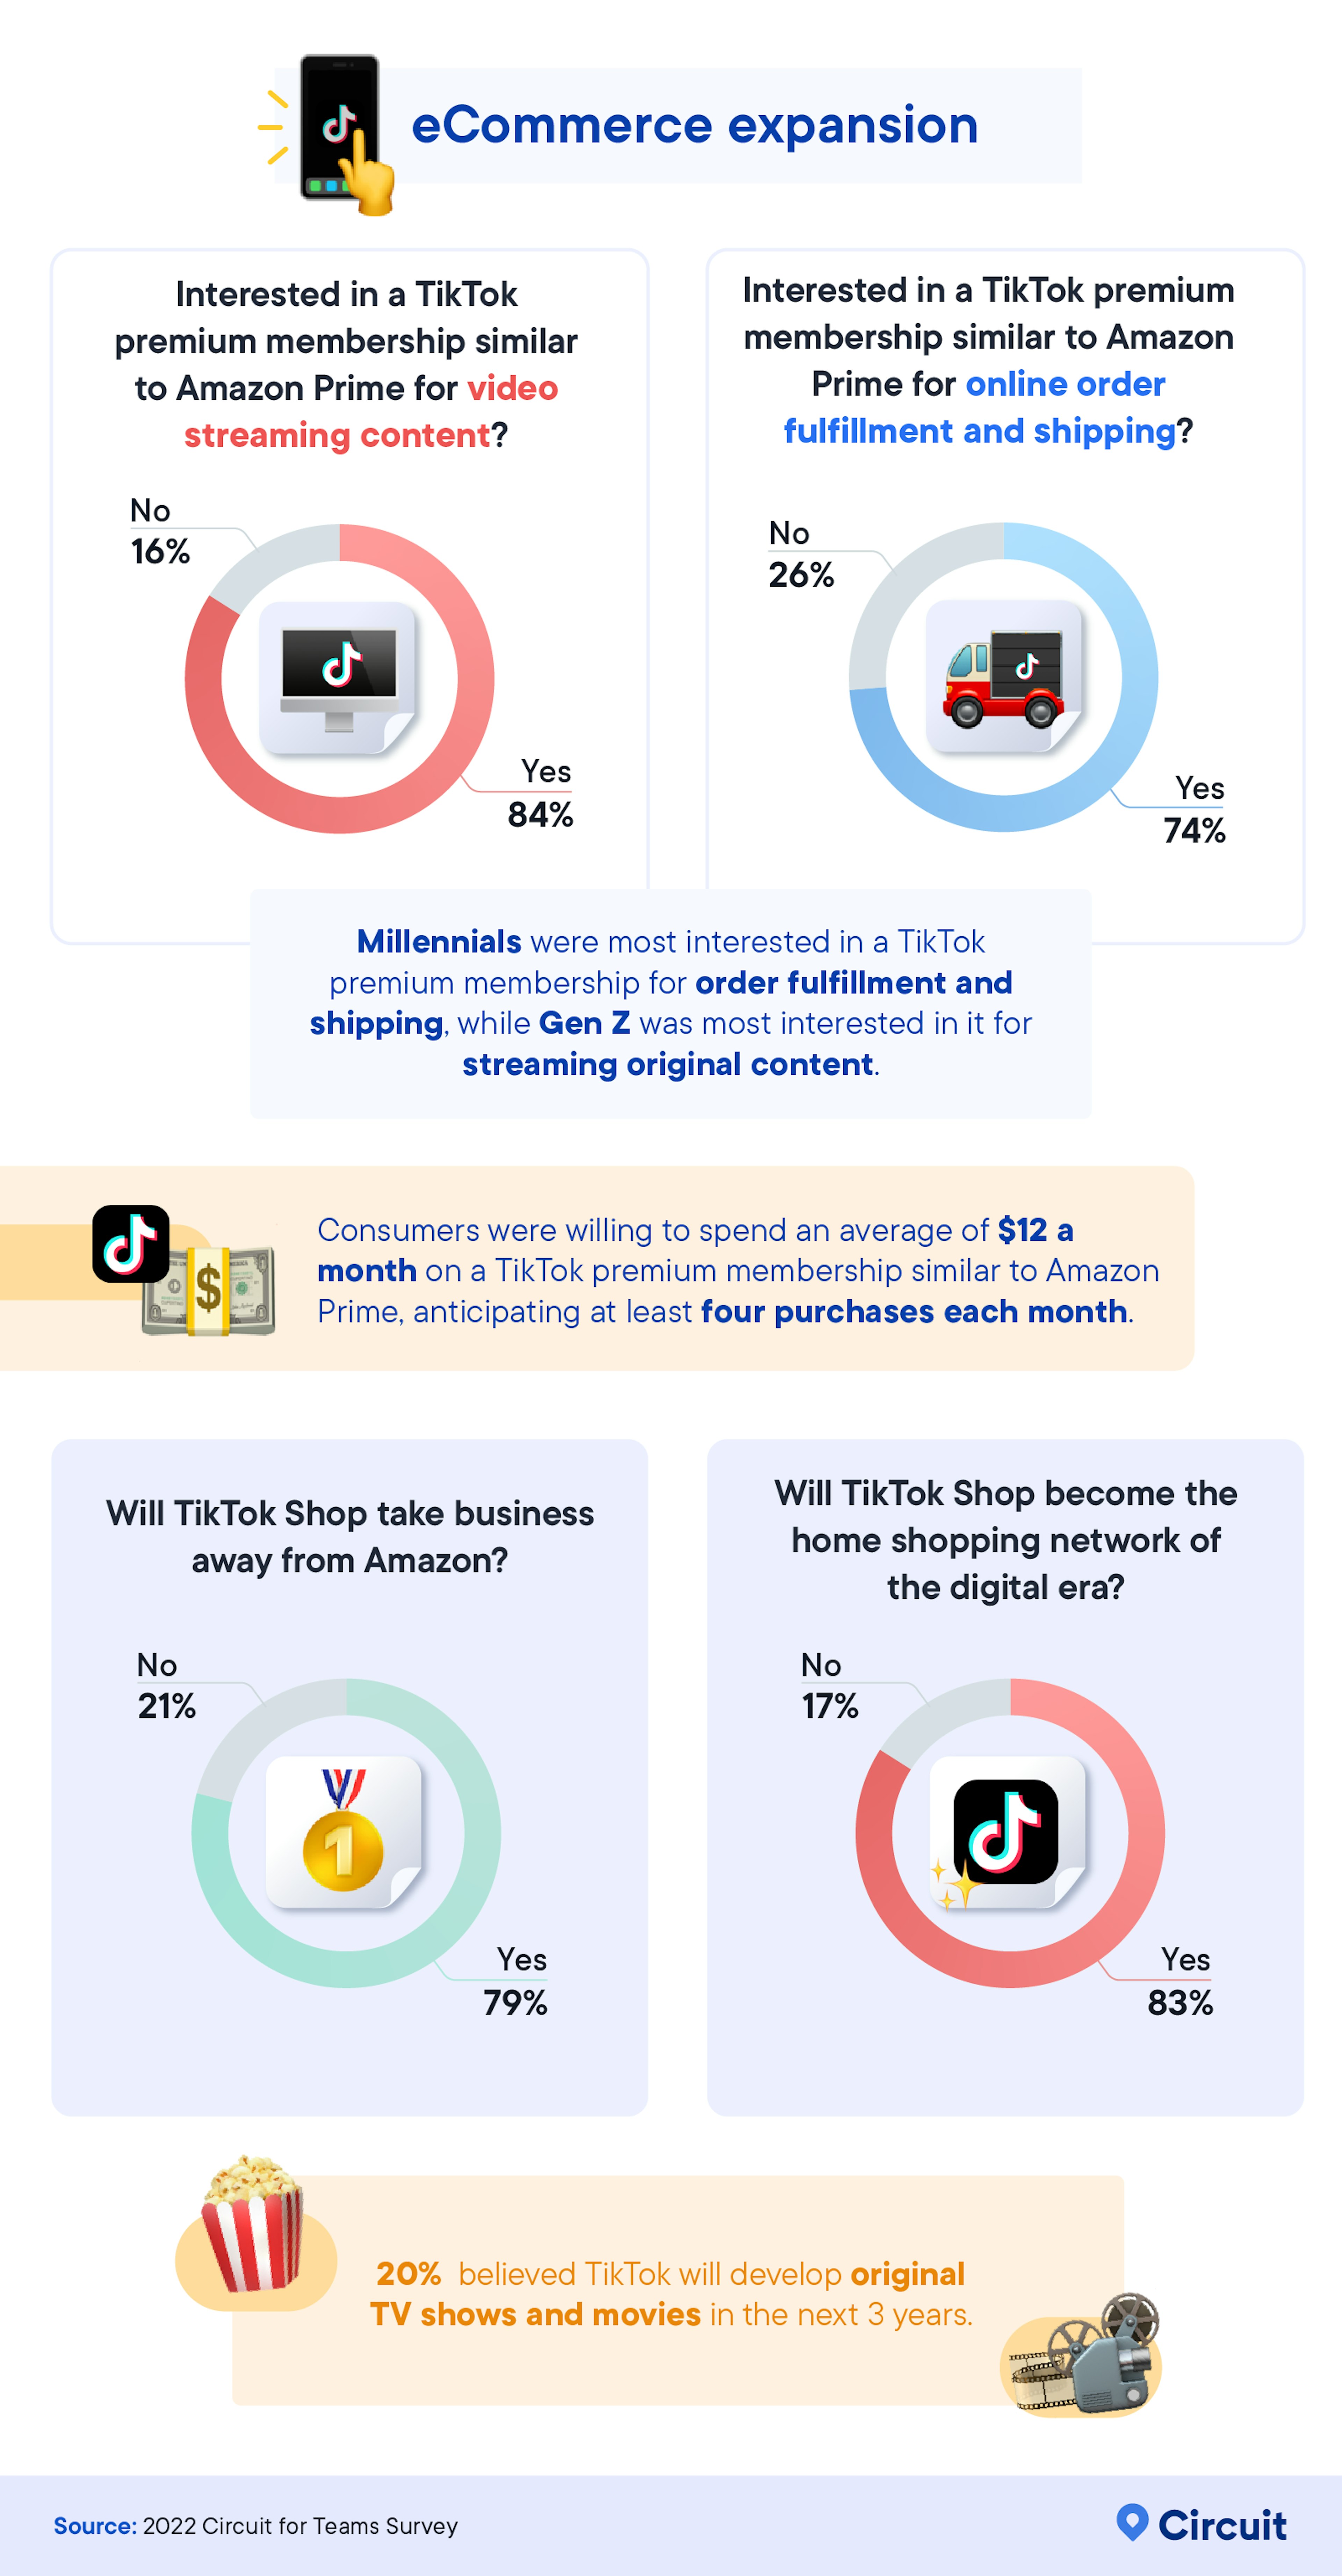 This explored consumers' perceptions towards the eCommerce expansion of TikTok Shop. Who is most interested, and how would they use it?